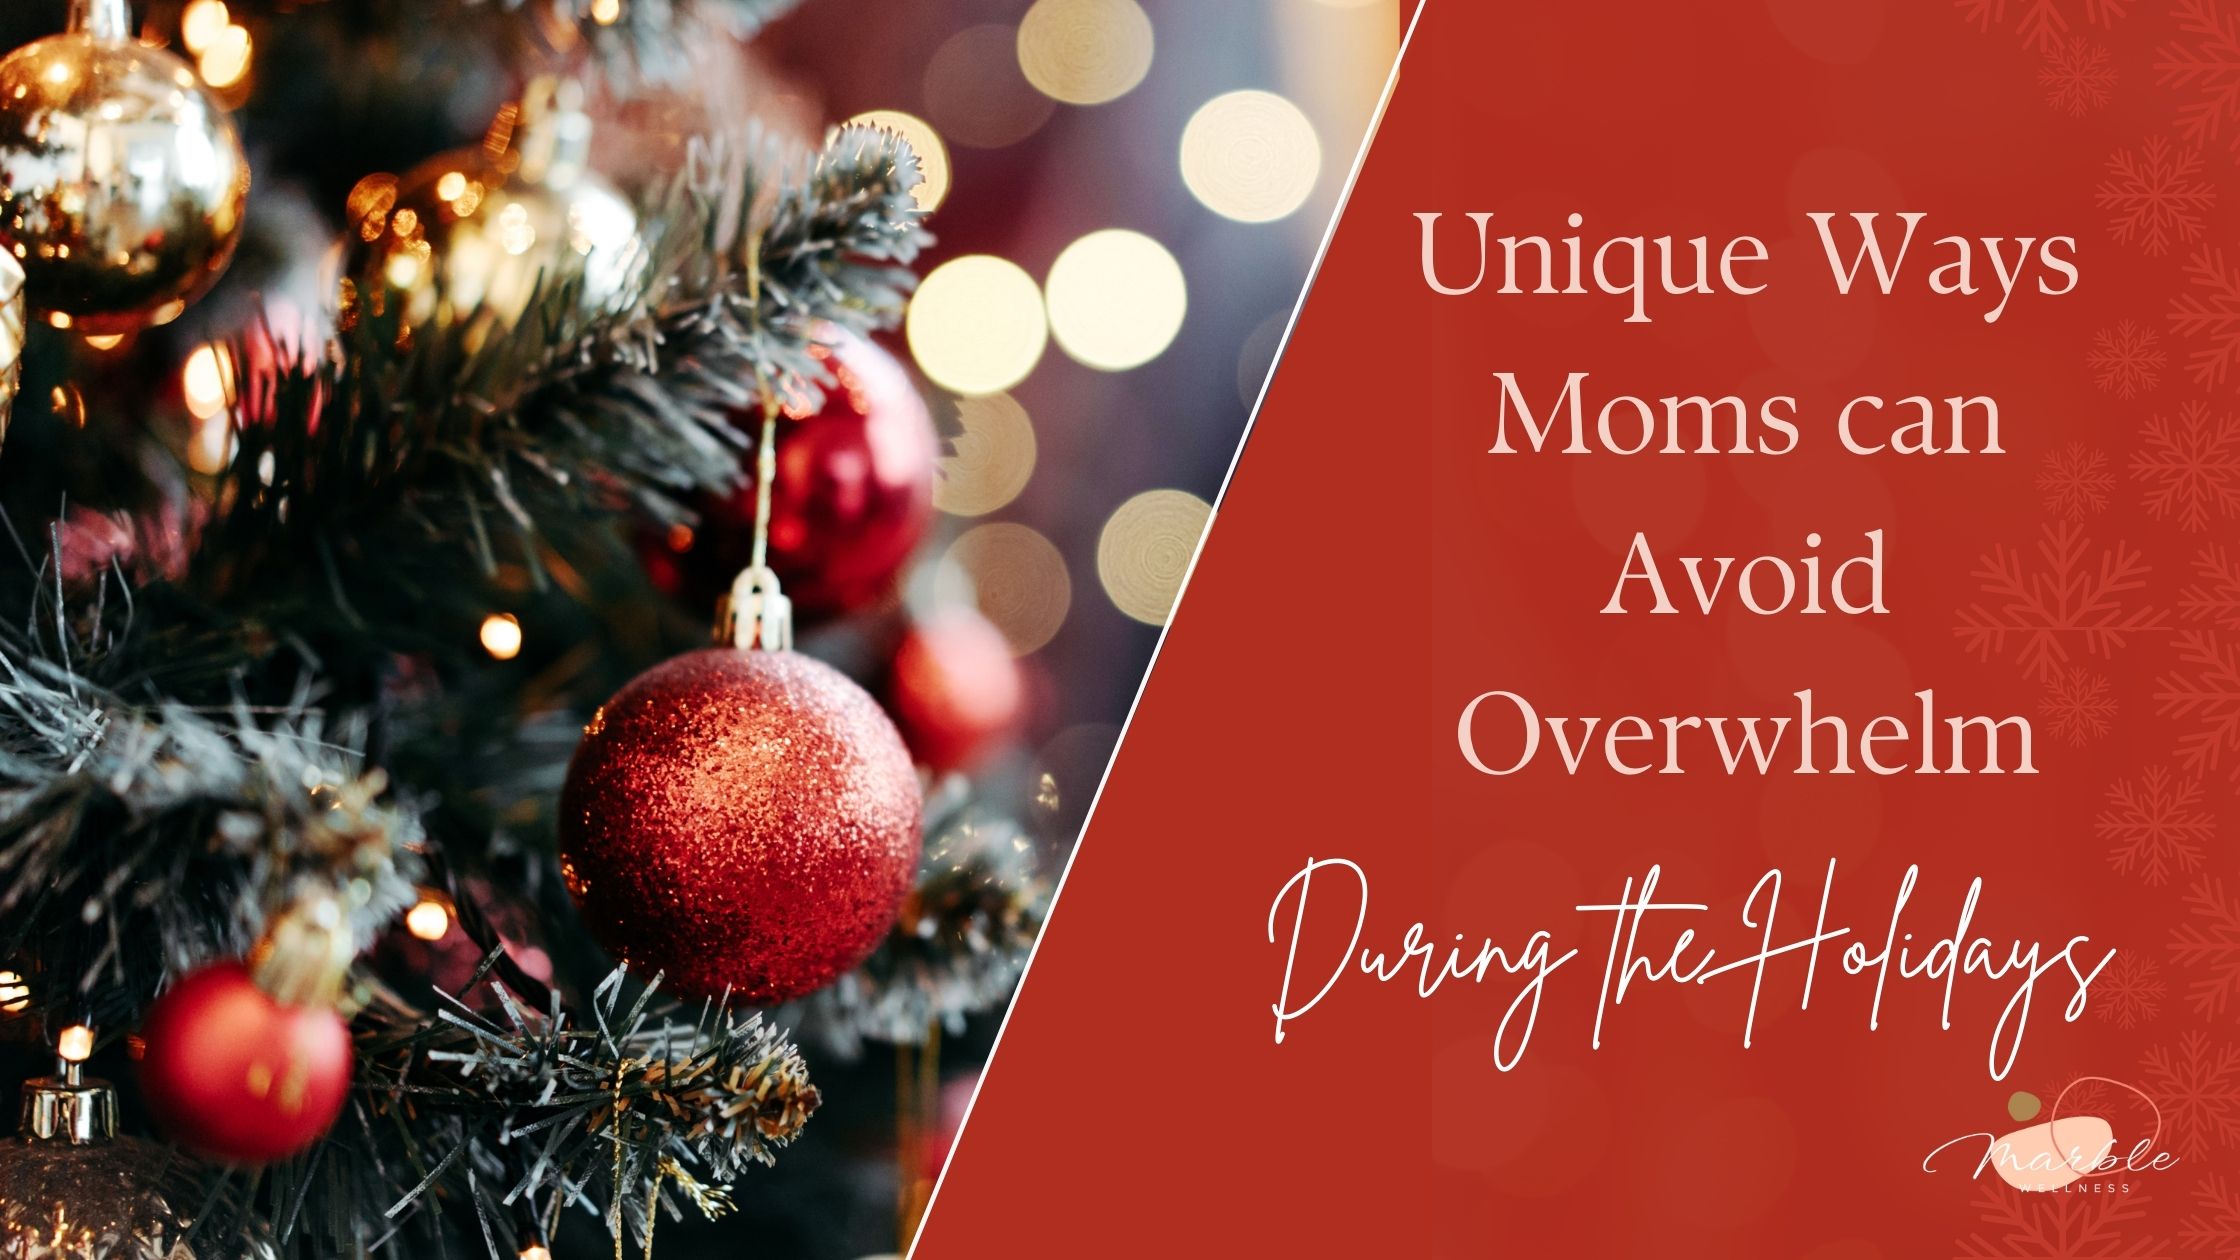 Unique Ways Moms can Avoid Overwhelm During the Holidays